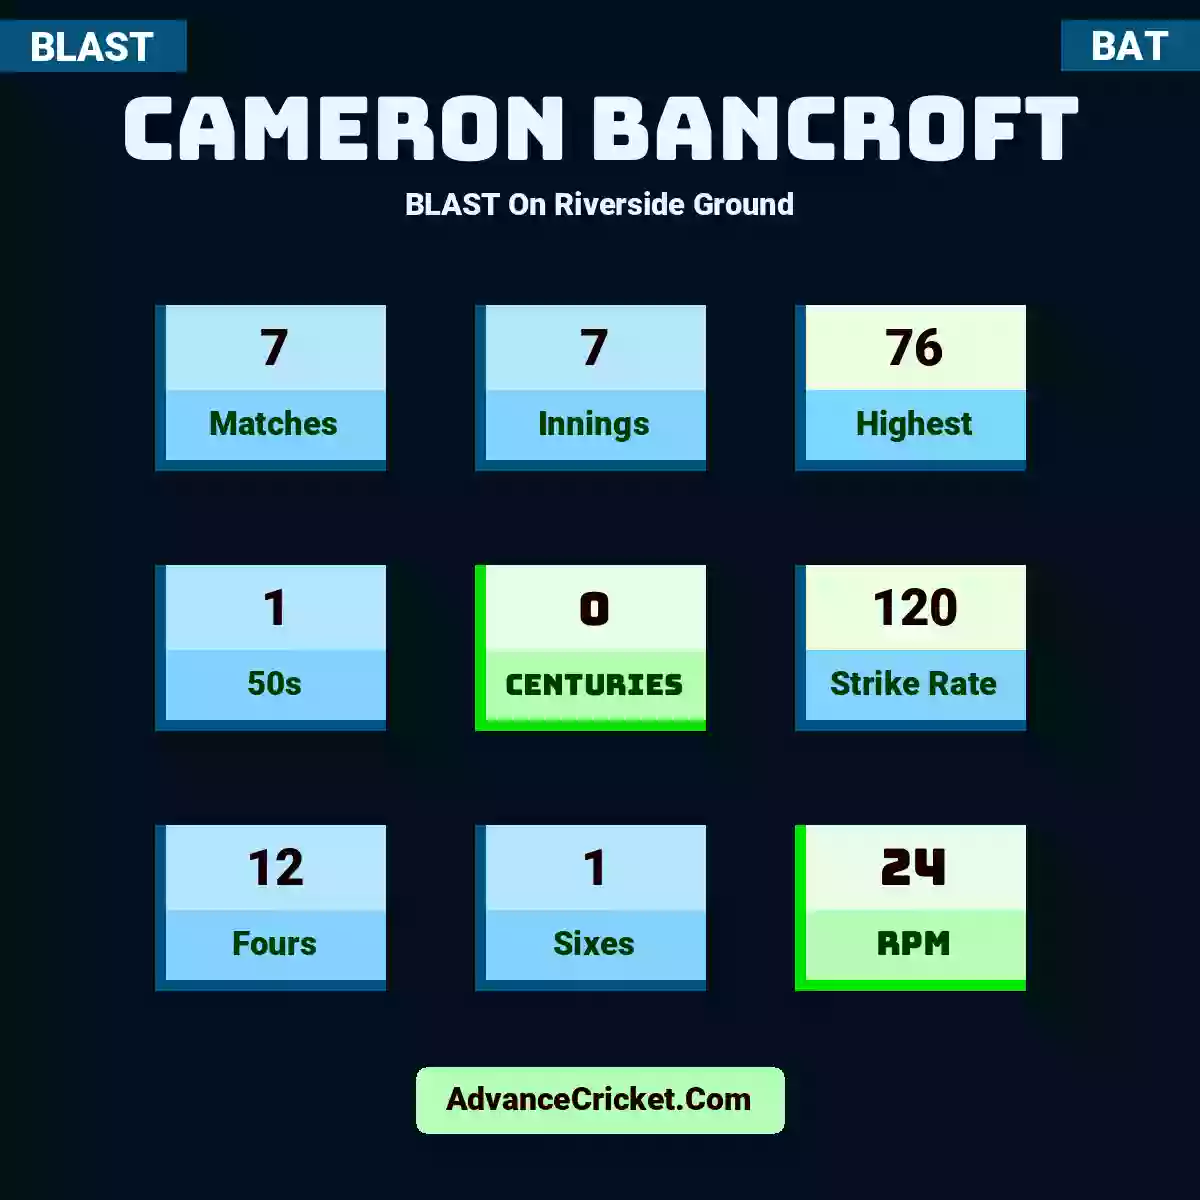 Cameron Bancroft BLAST  On Riverside Ground, Cameron Bancroft played 7 matches, scored 76 runs as highest, 1 half-centuries, and 0 centuries, with a strike rate of 120. C.Bancroft hit 12 fours and 1 sixes, with an RPM of 24.